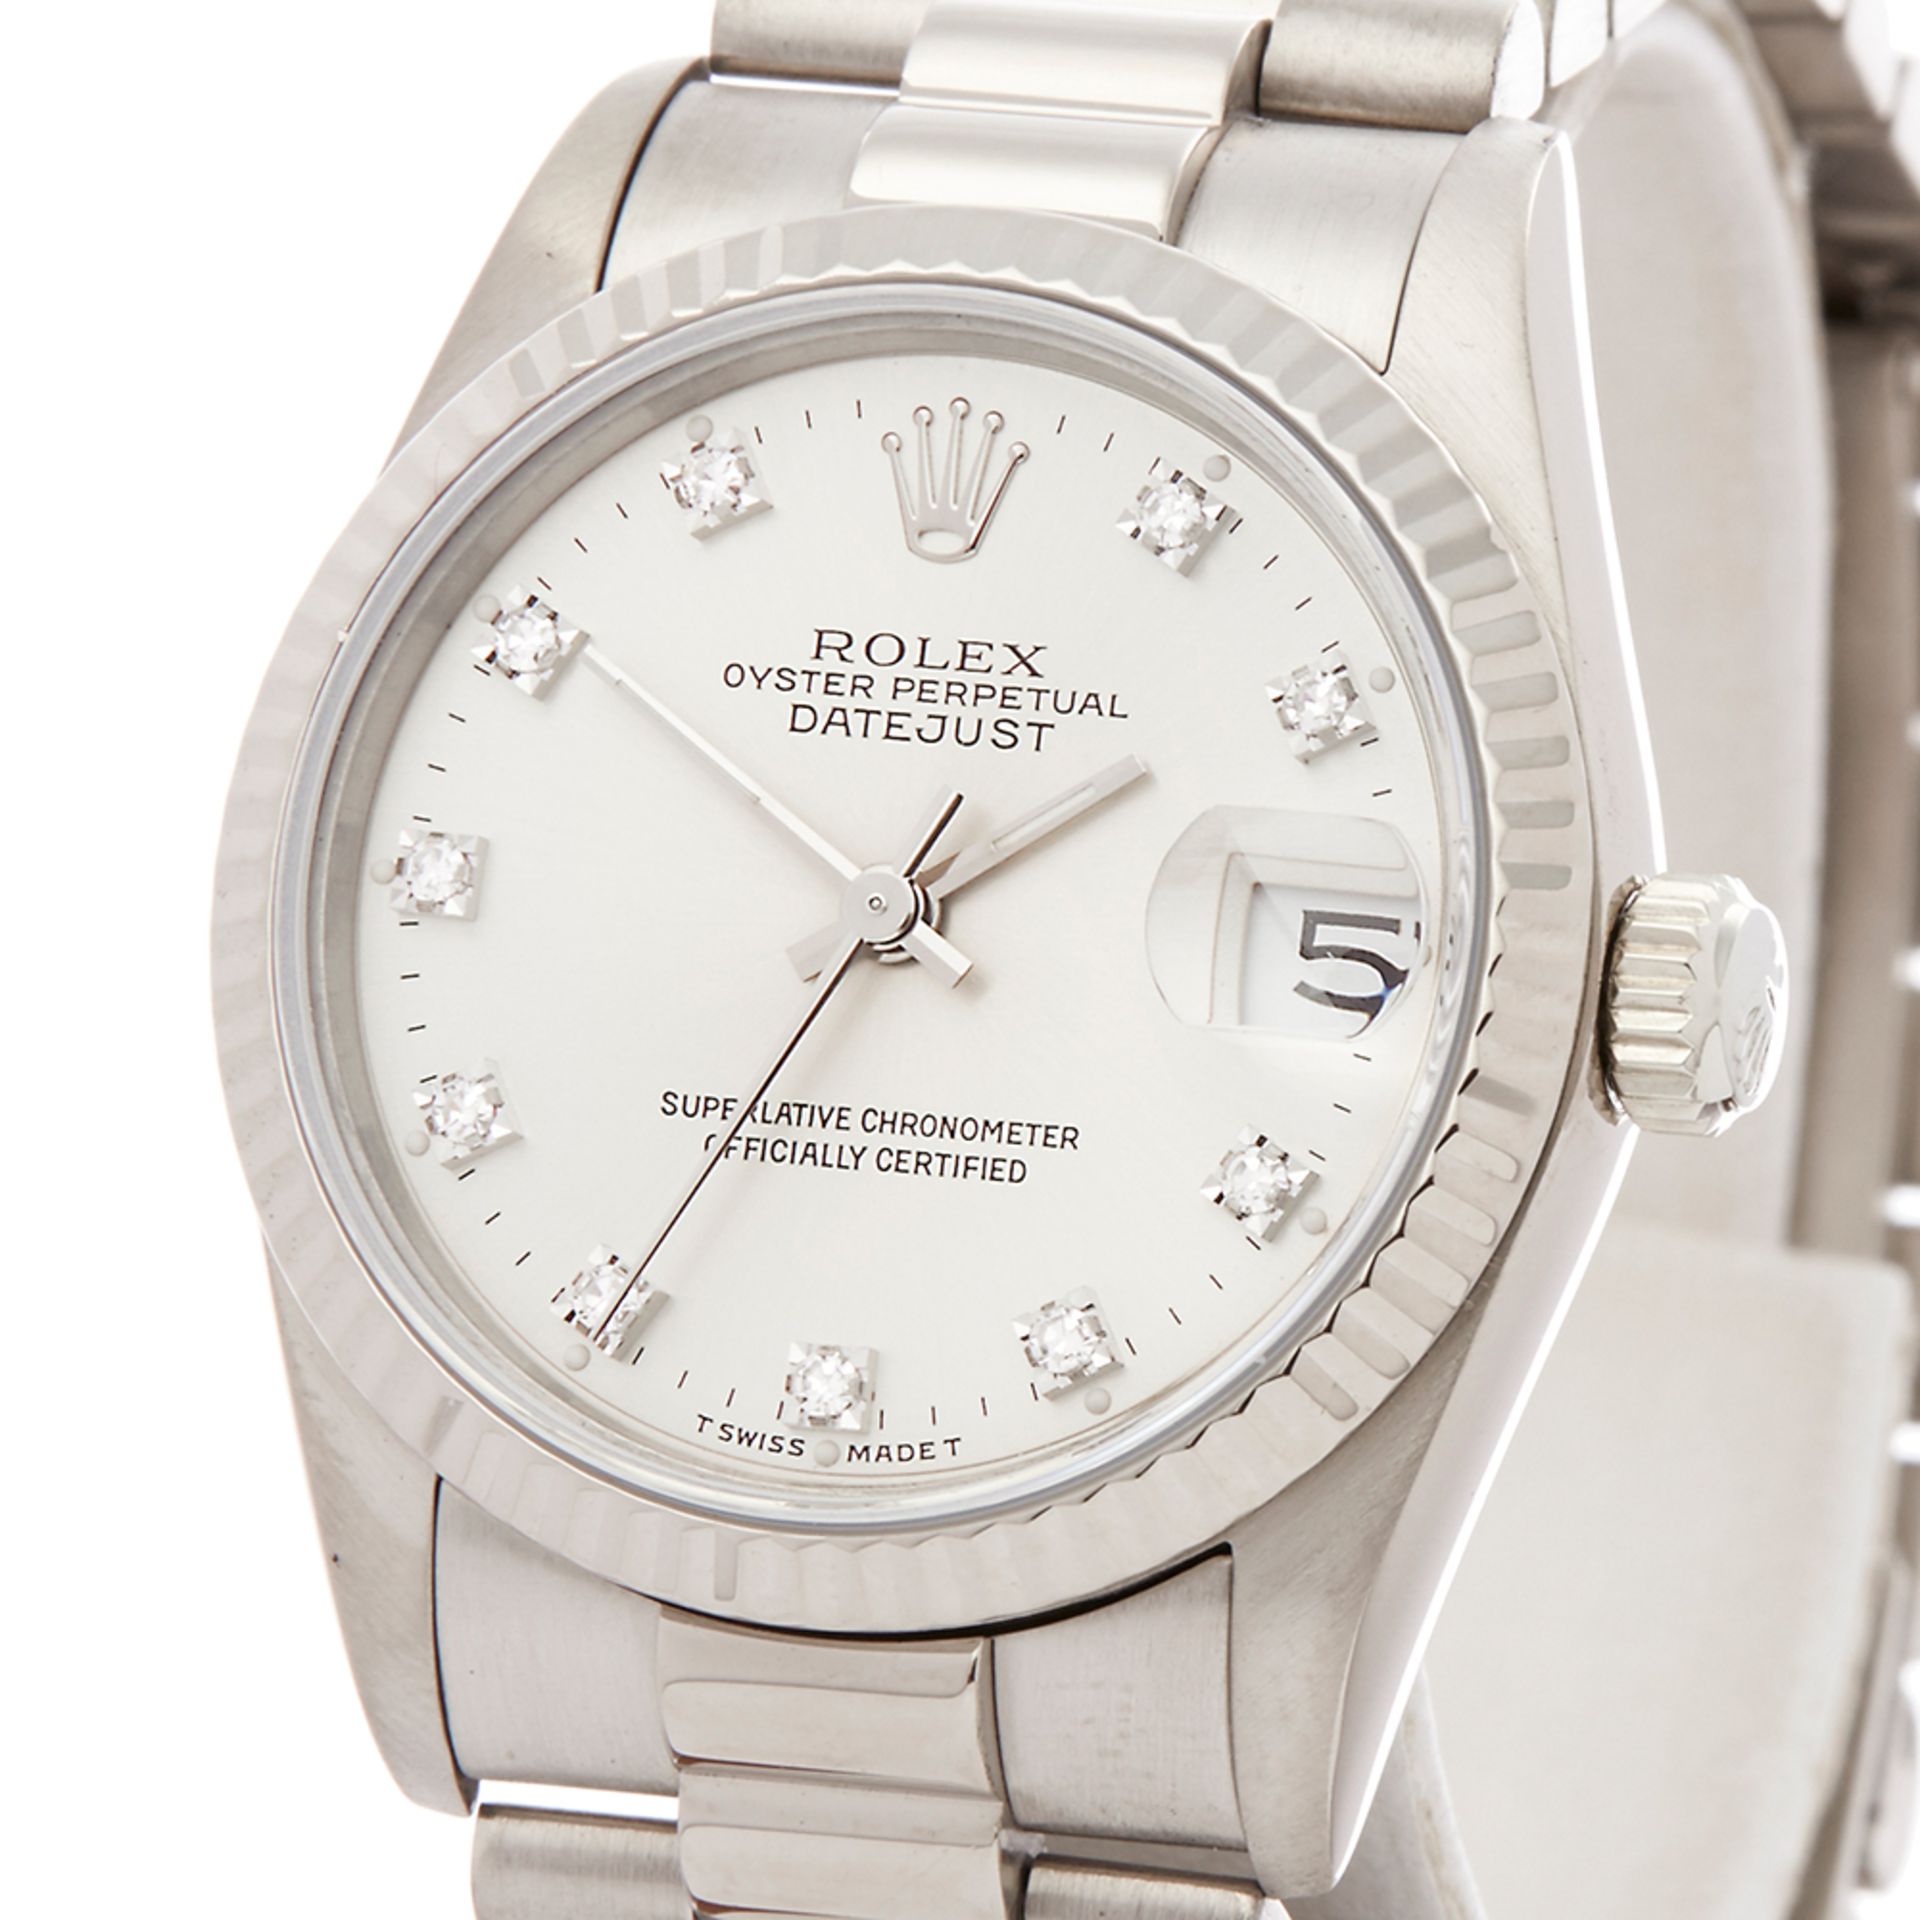 Rolex Datejust 31mm 18k White Gold - 68279 - Image 3 of 7